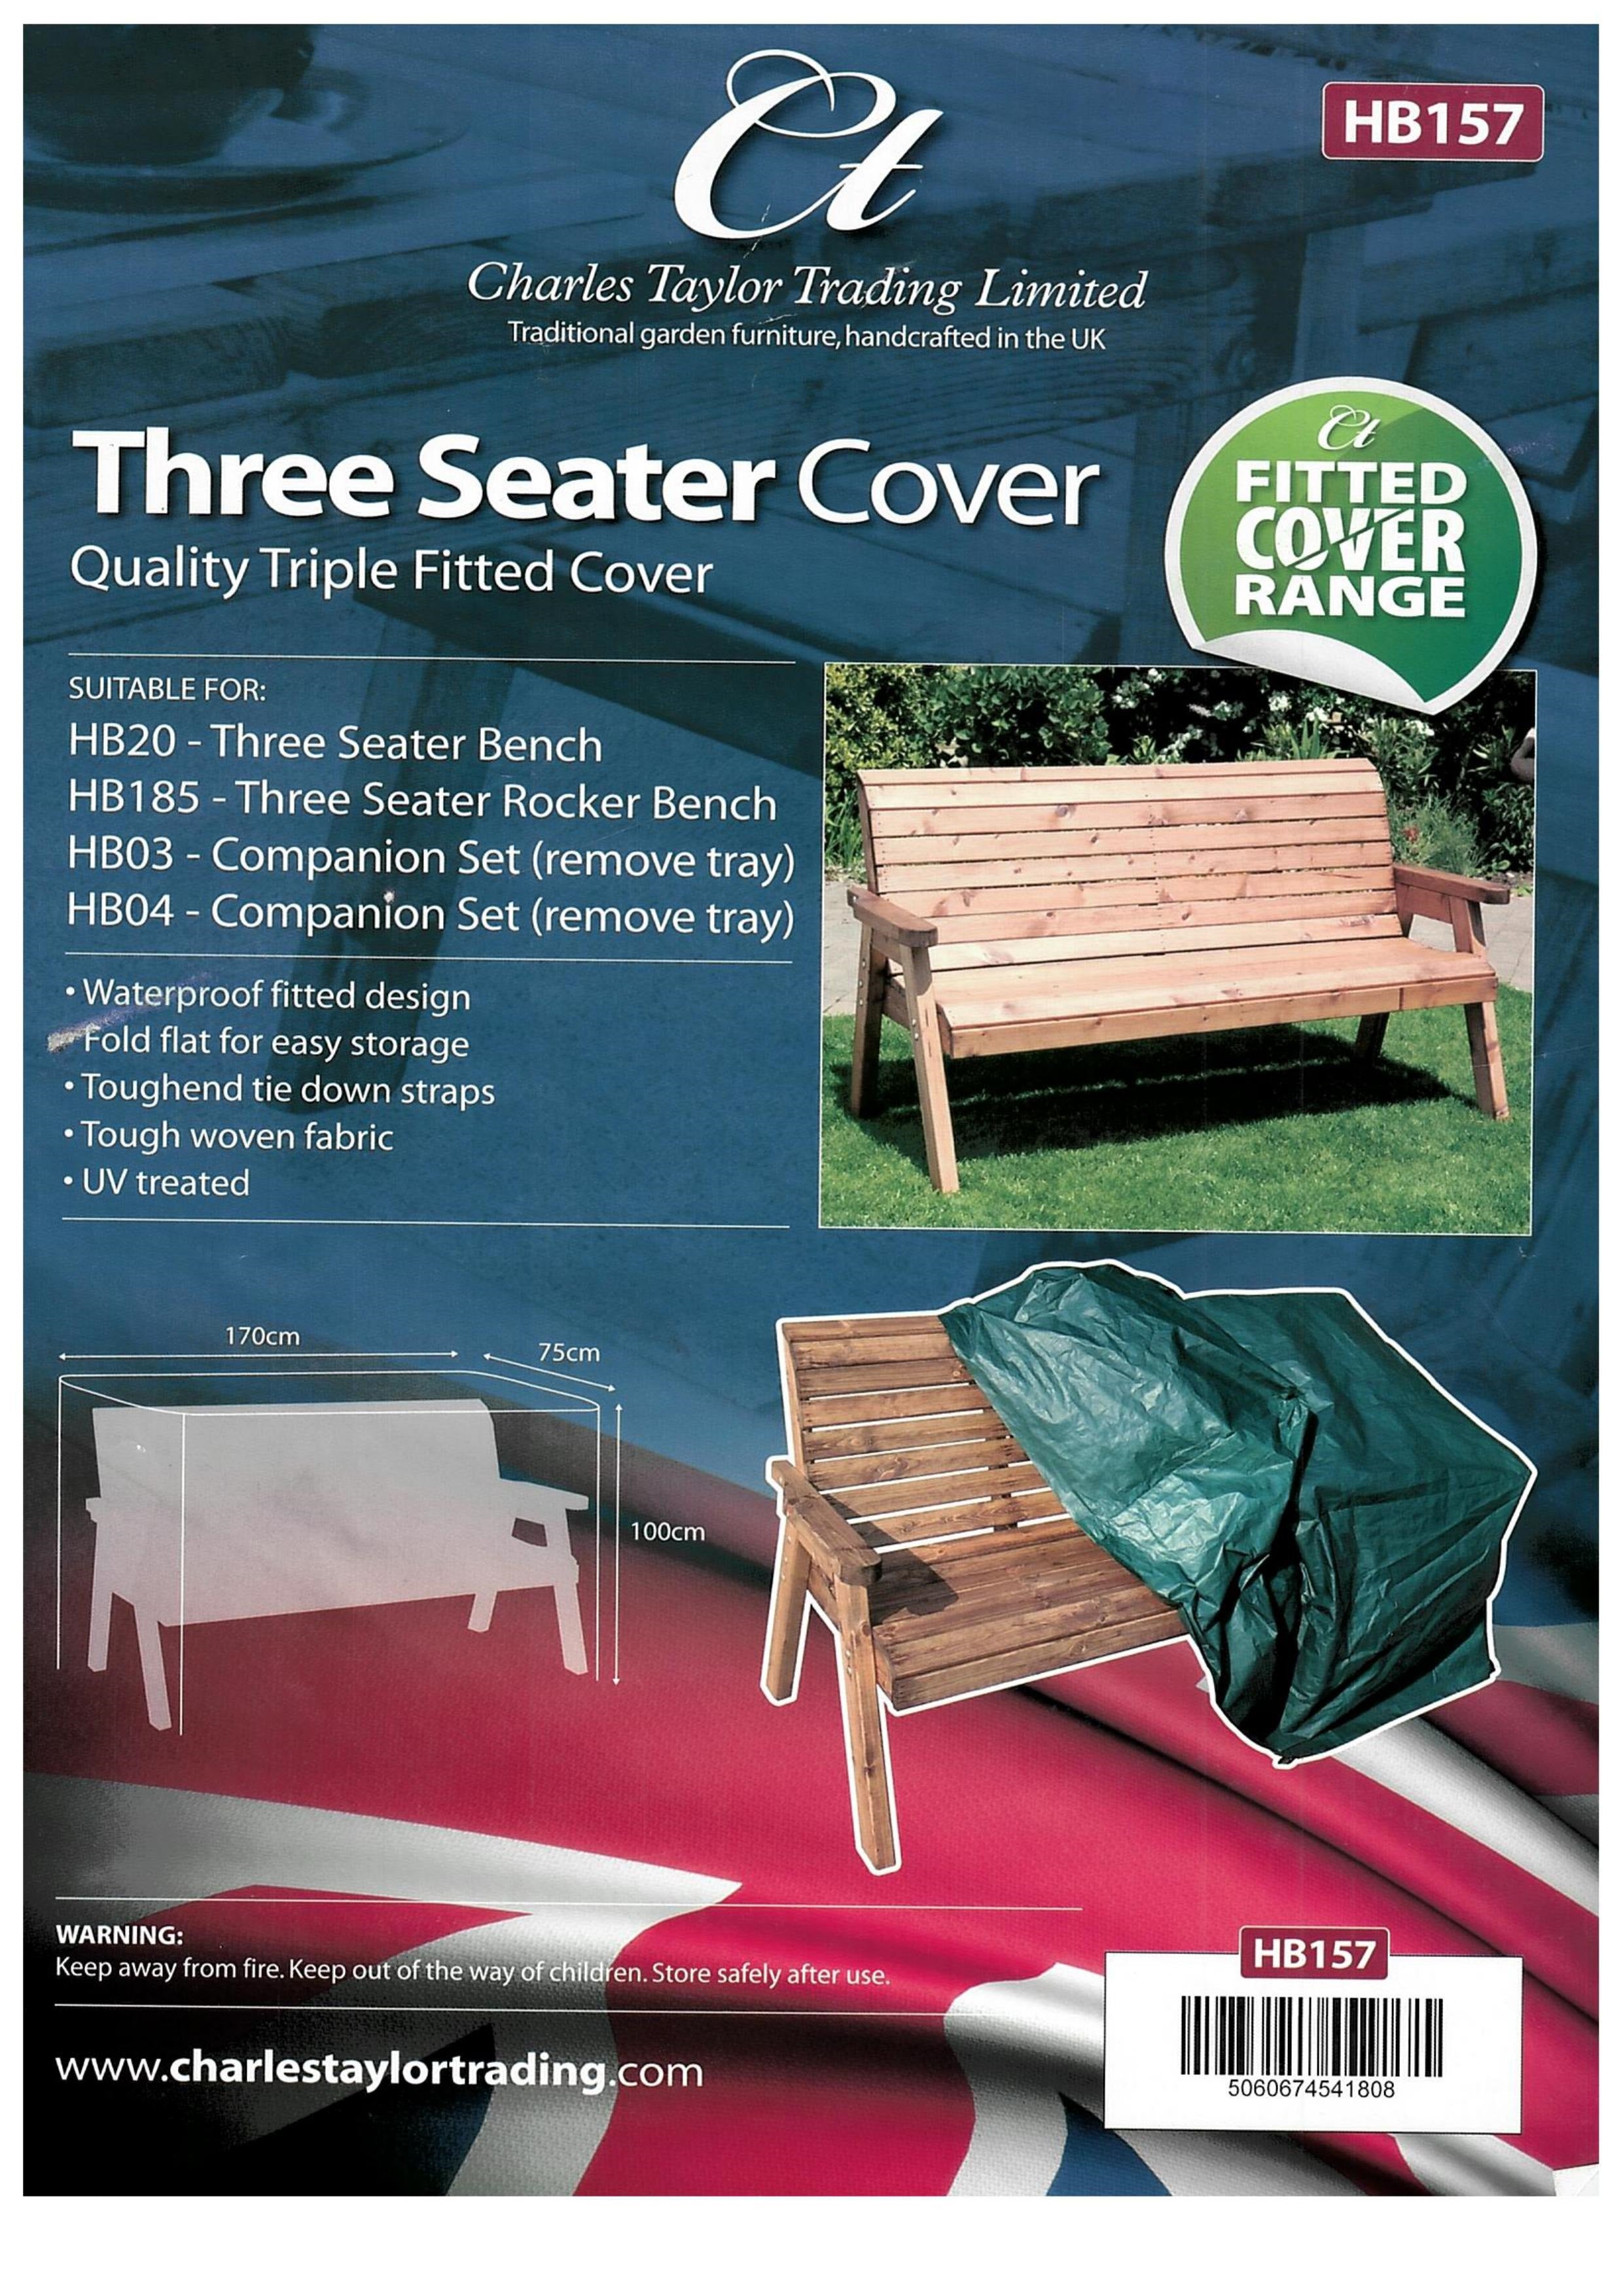 HB157 - Deluxe Three Seater Bench Cover